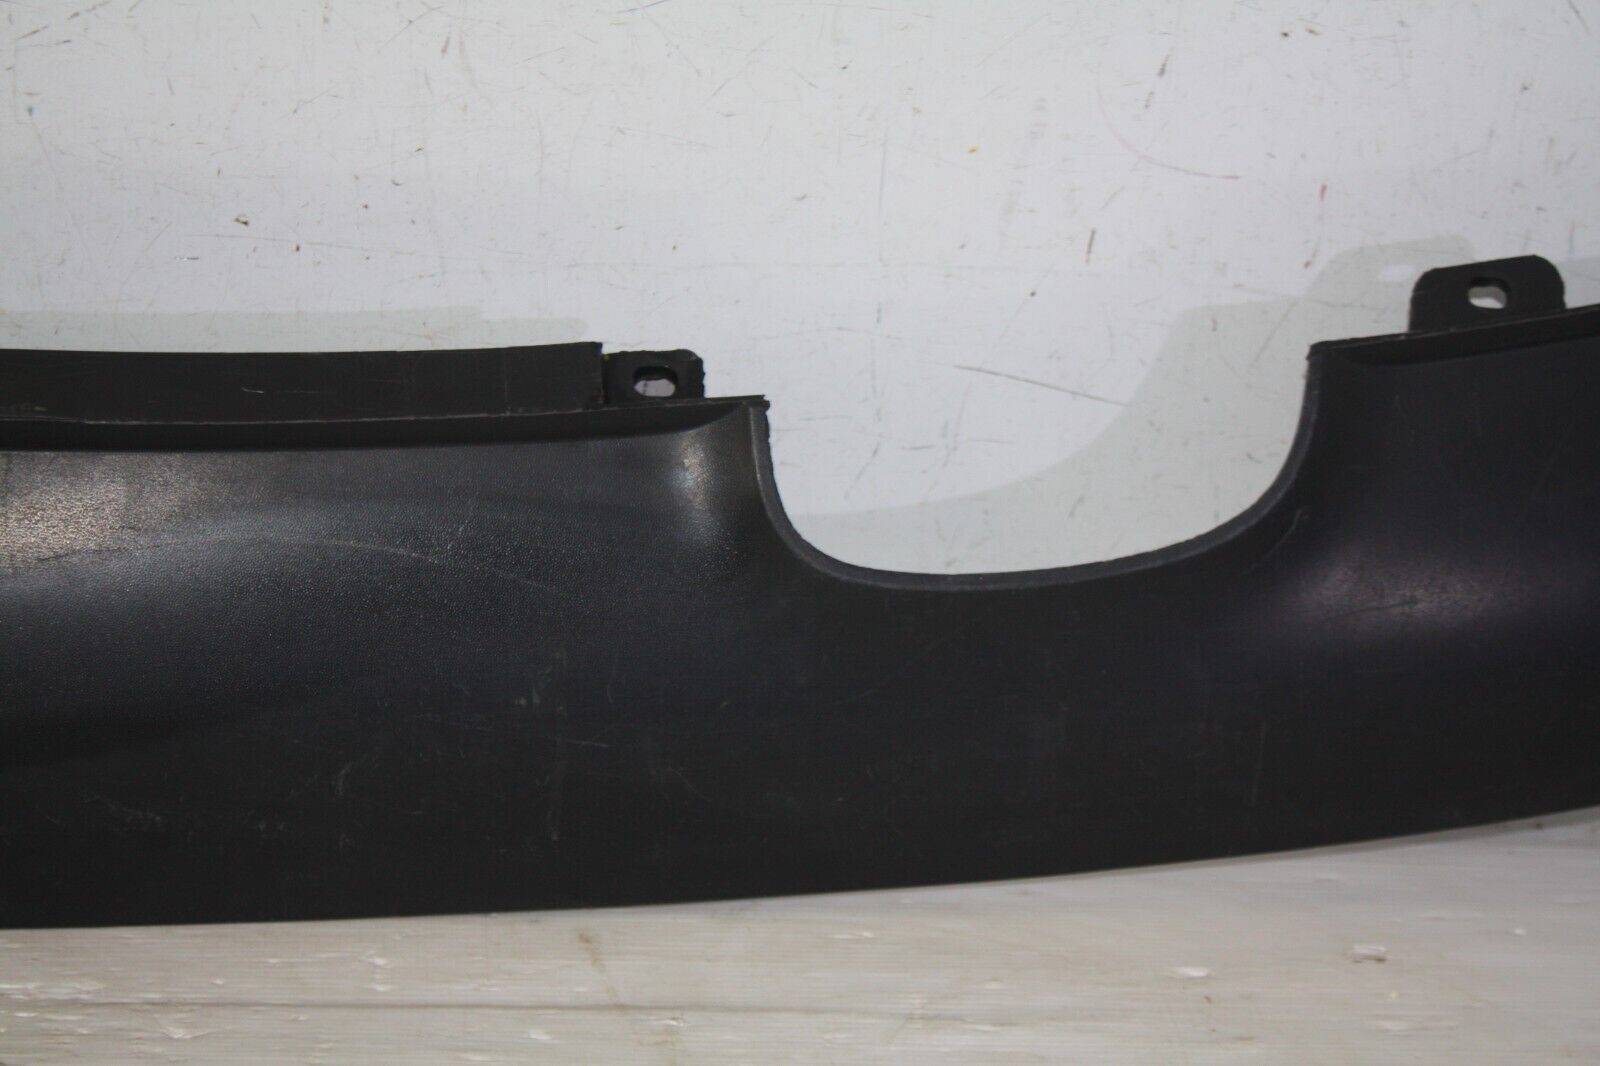 VW-Polo-Rear-Bumper-Lower-Section-2002-To-2005-6Q6807521-Genuine-176093468813-3